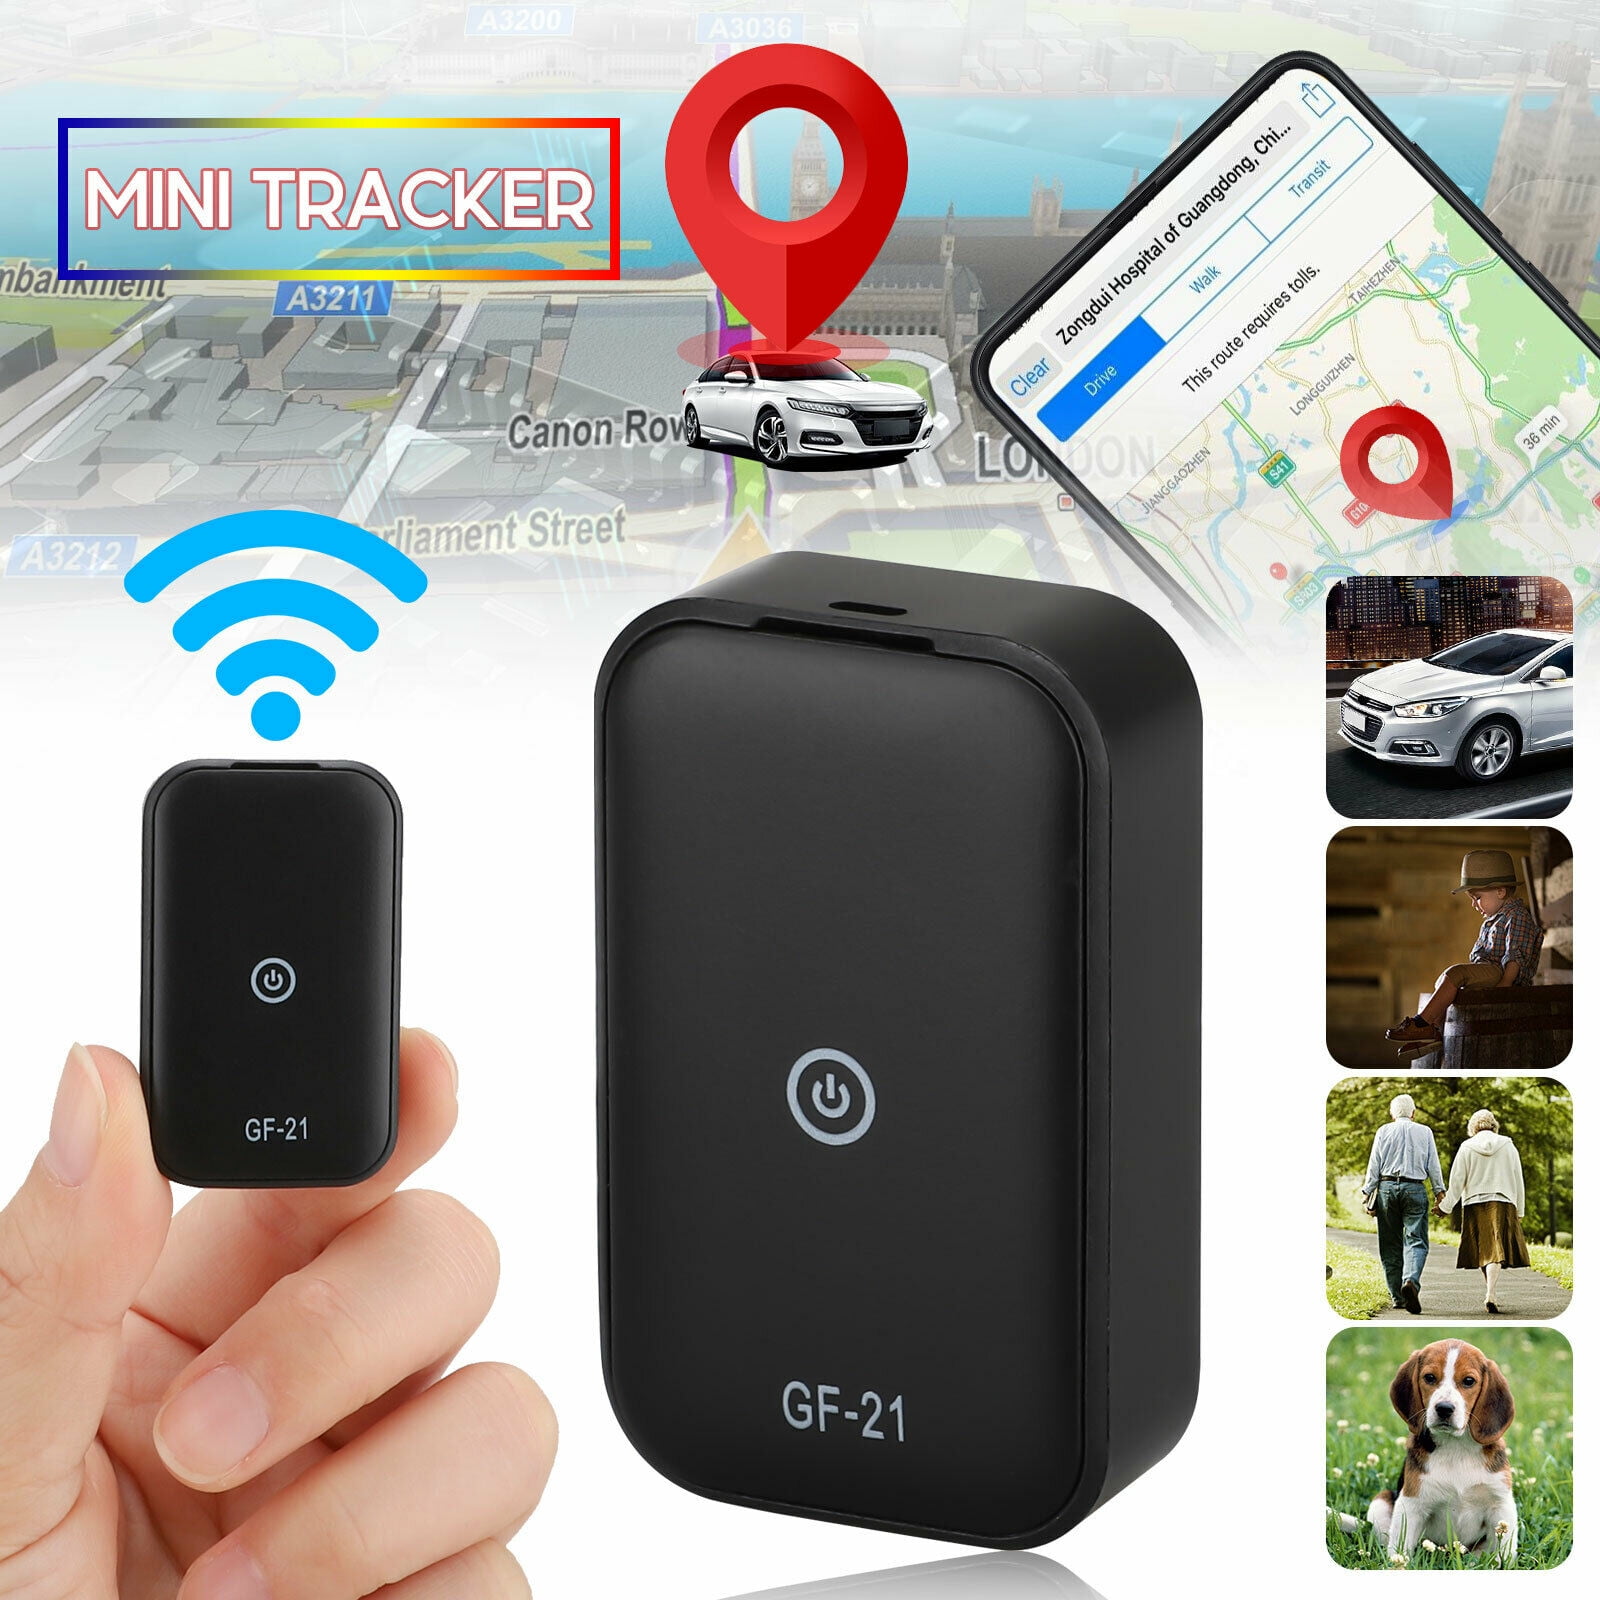 2020 Model Mini Real time GPS Tracker. For Vehicles, Car, Kids. Hidden small Portable